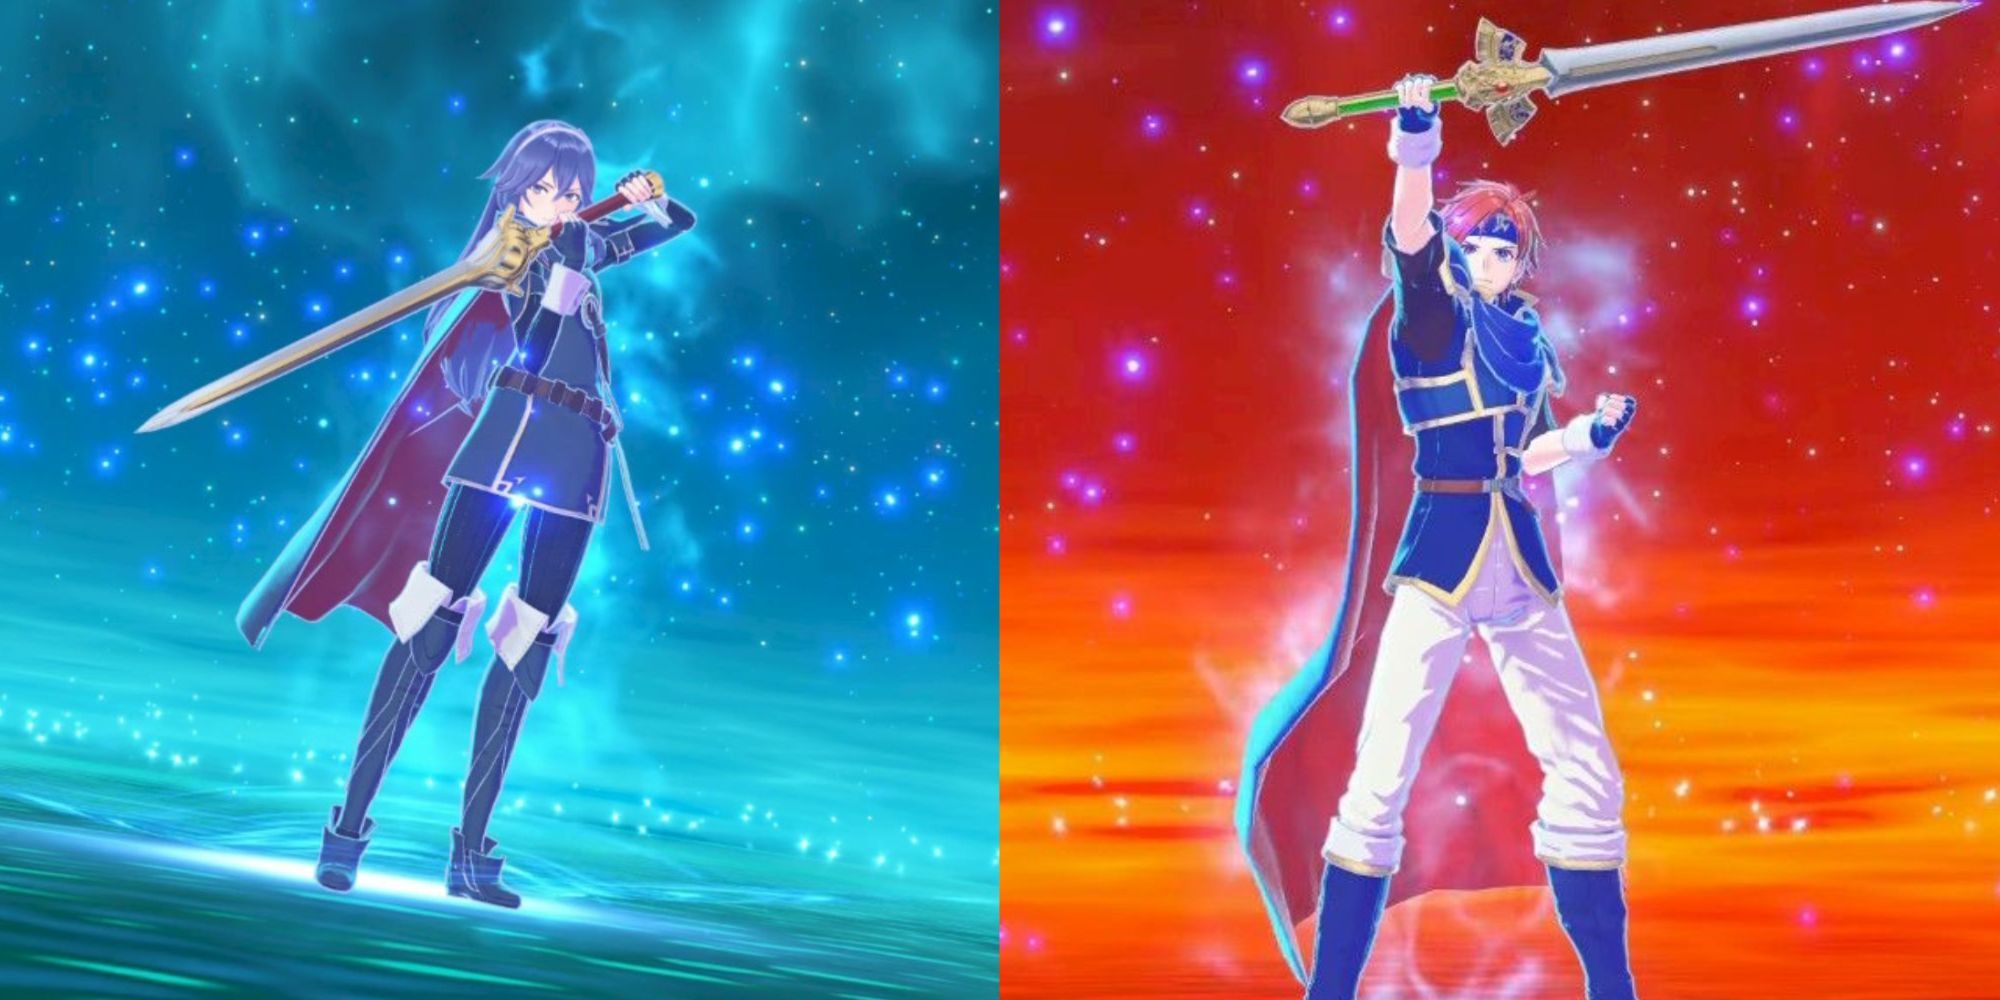 Fire Emblem Engage - Lucina and Roy in Emblem Form